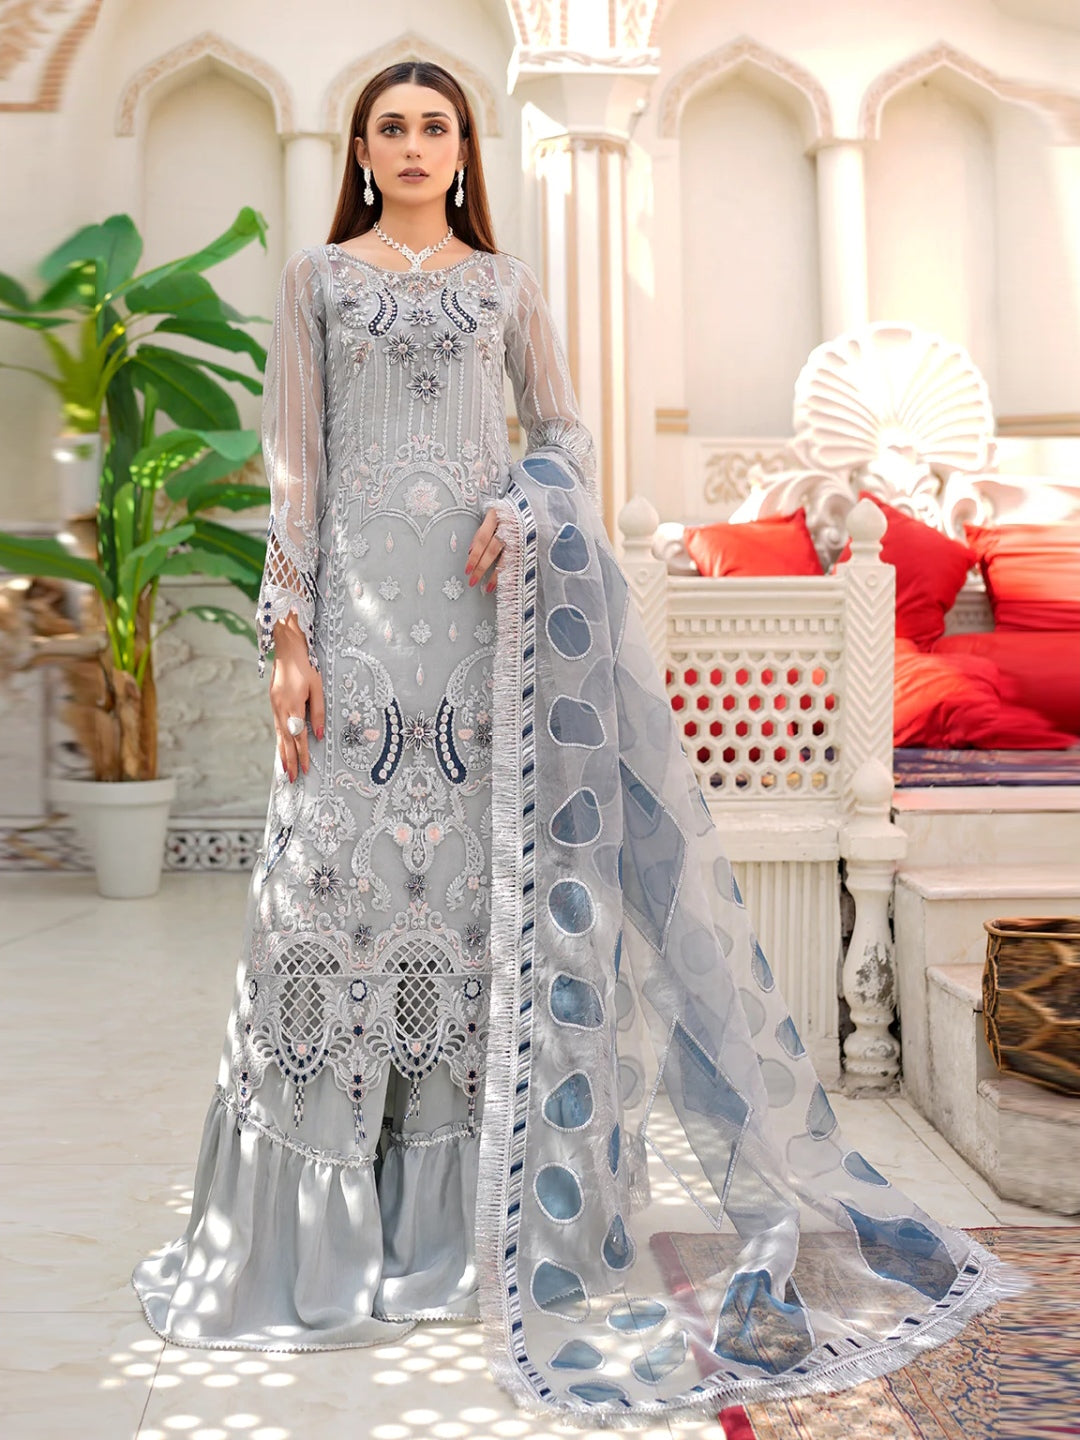 Pin by Farhaana Saiyed on Westerrrn Balll Gownsss Desiiign... | Pakistani  fancy dresses, Long sleeve evening gowns, Pakistani wedding outfits